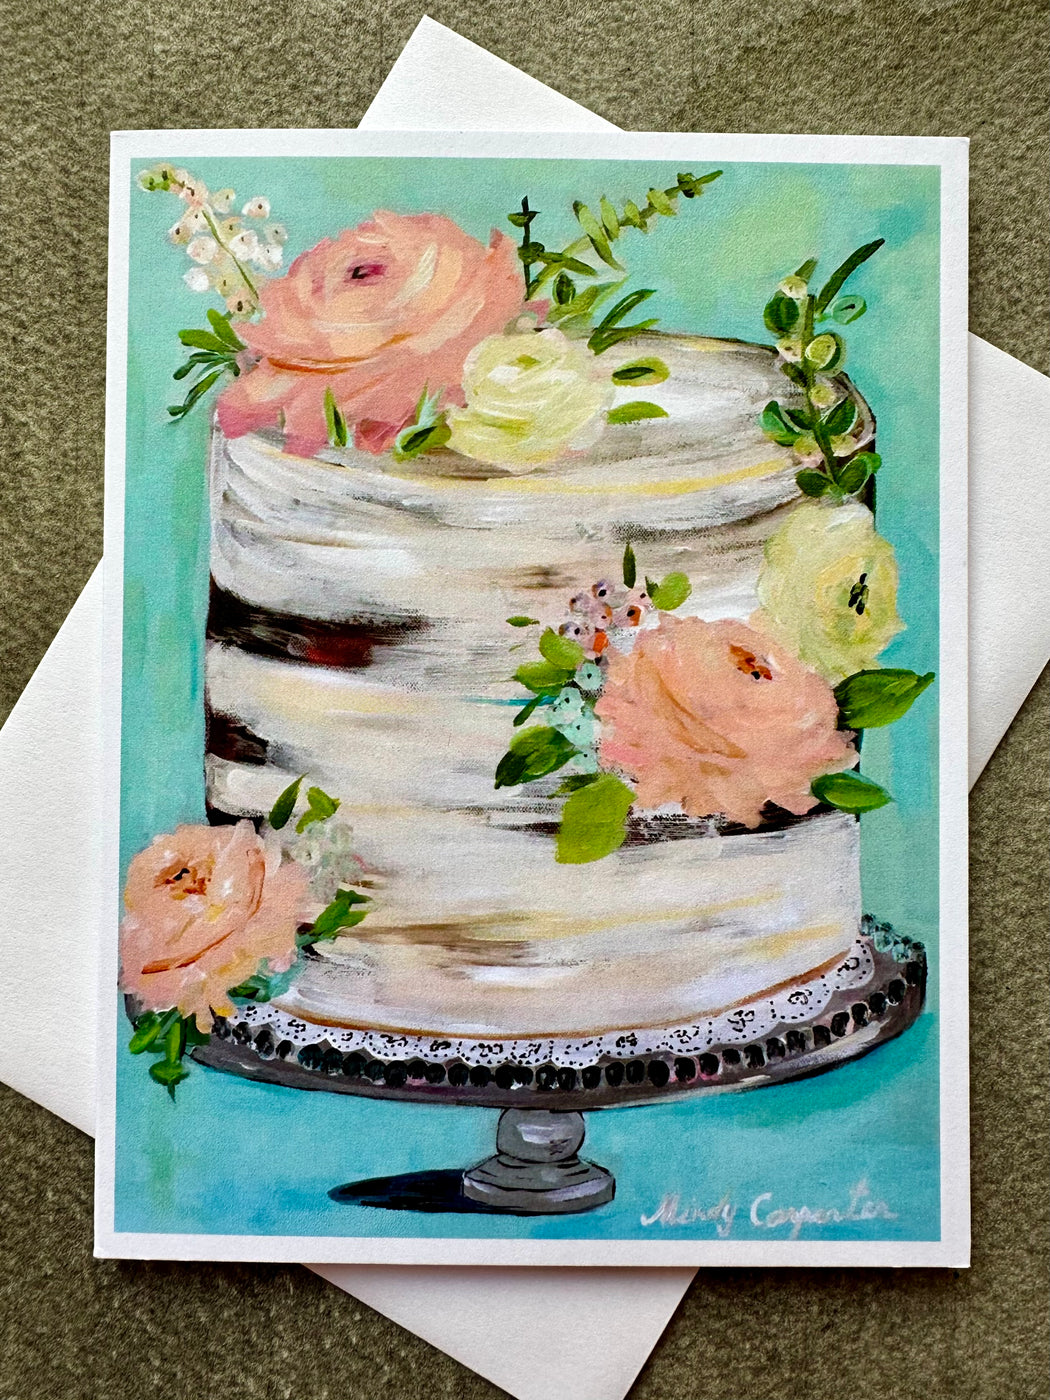 "Fancy Floral Cake" Card by Mindy Carpenter